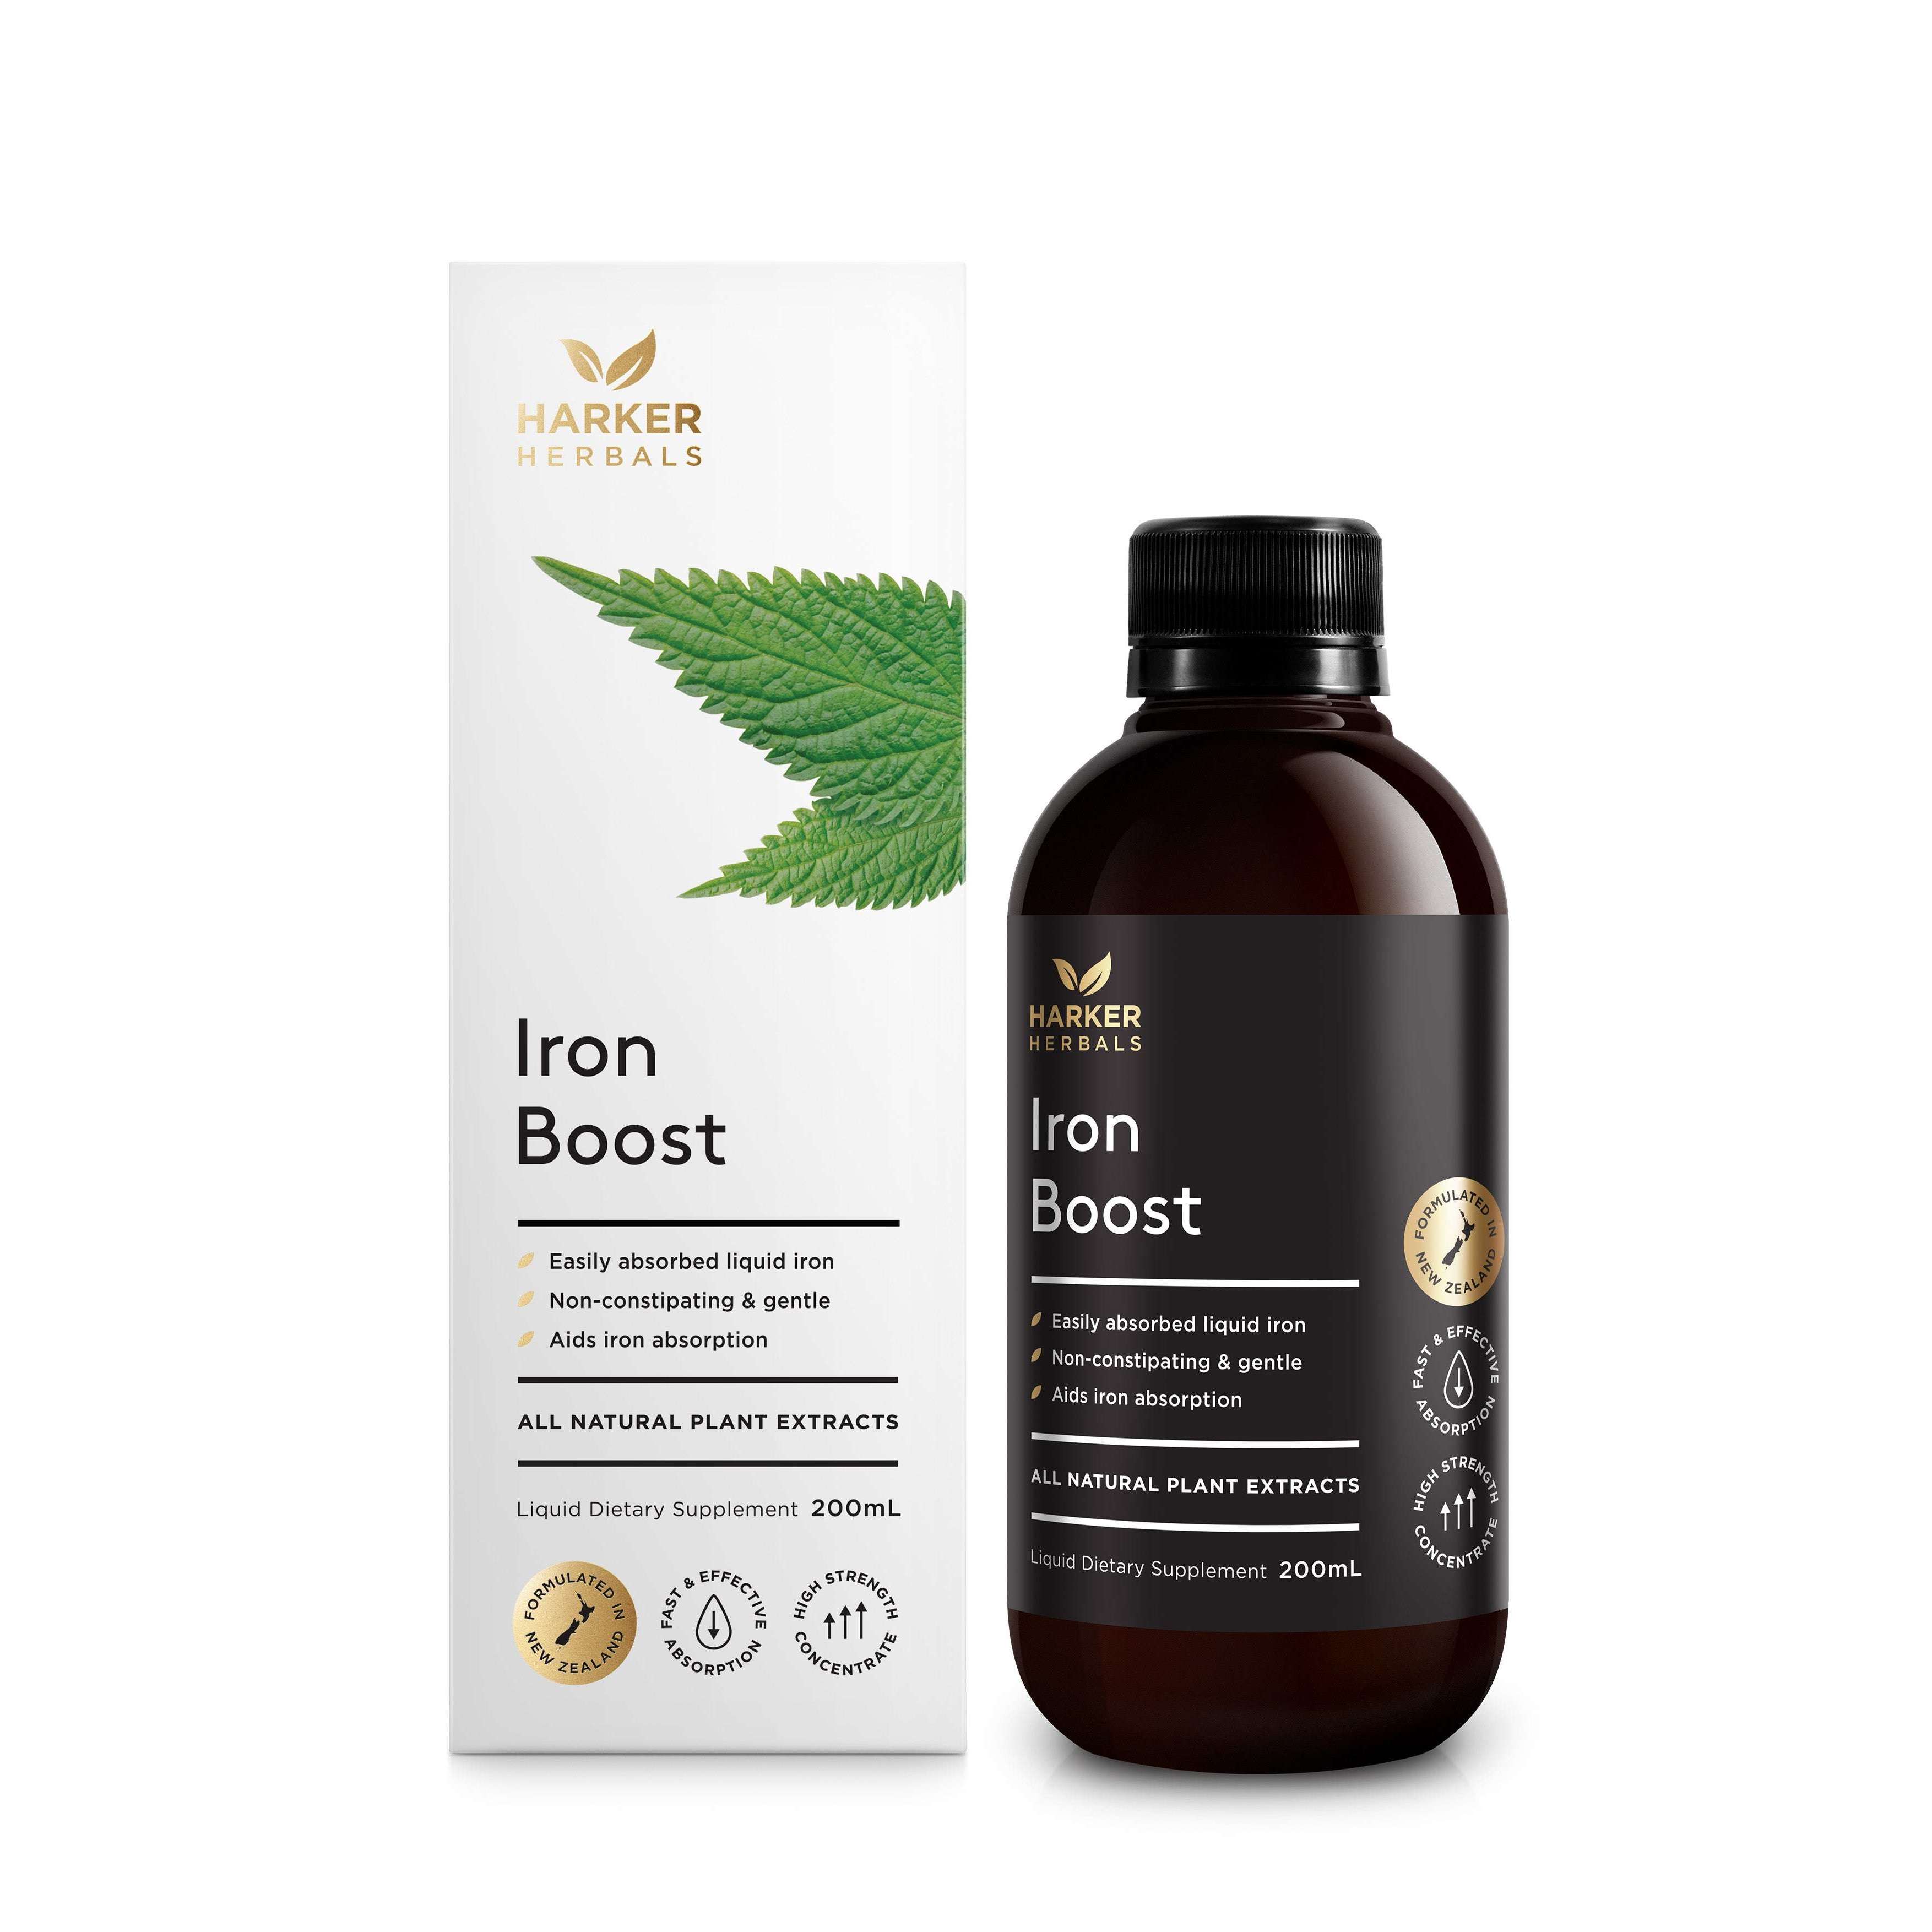 Be well. Iron Boost